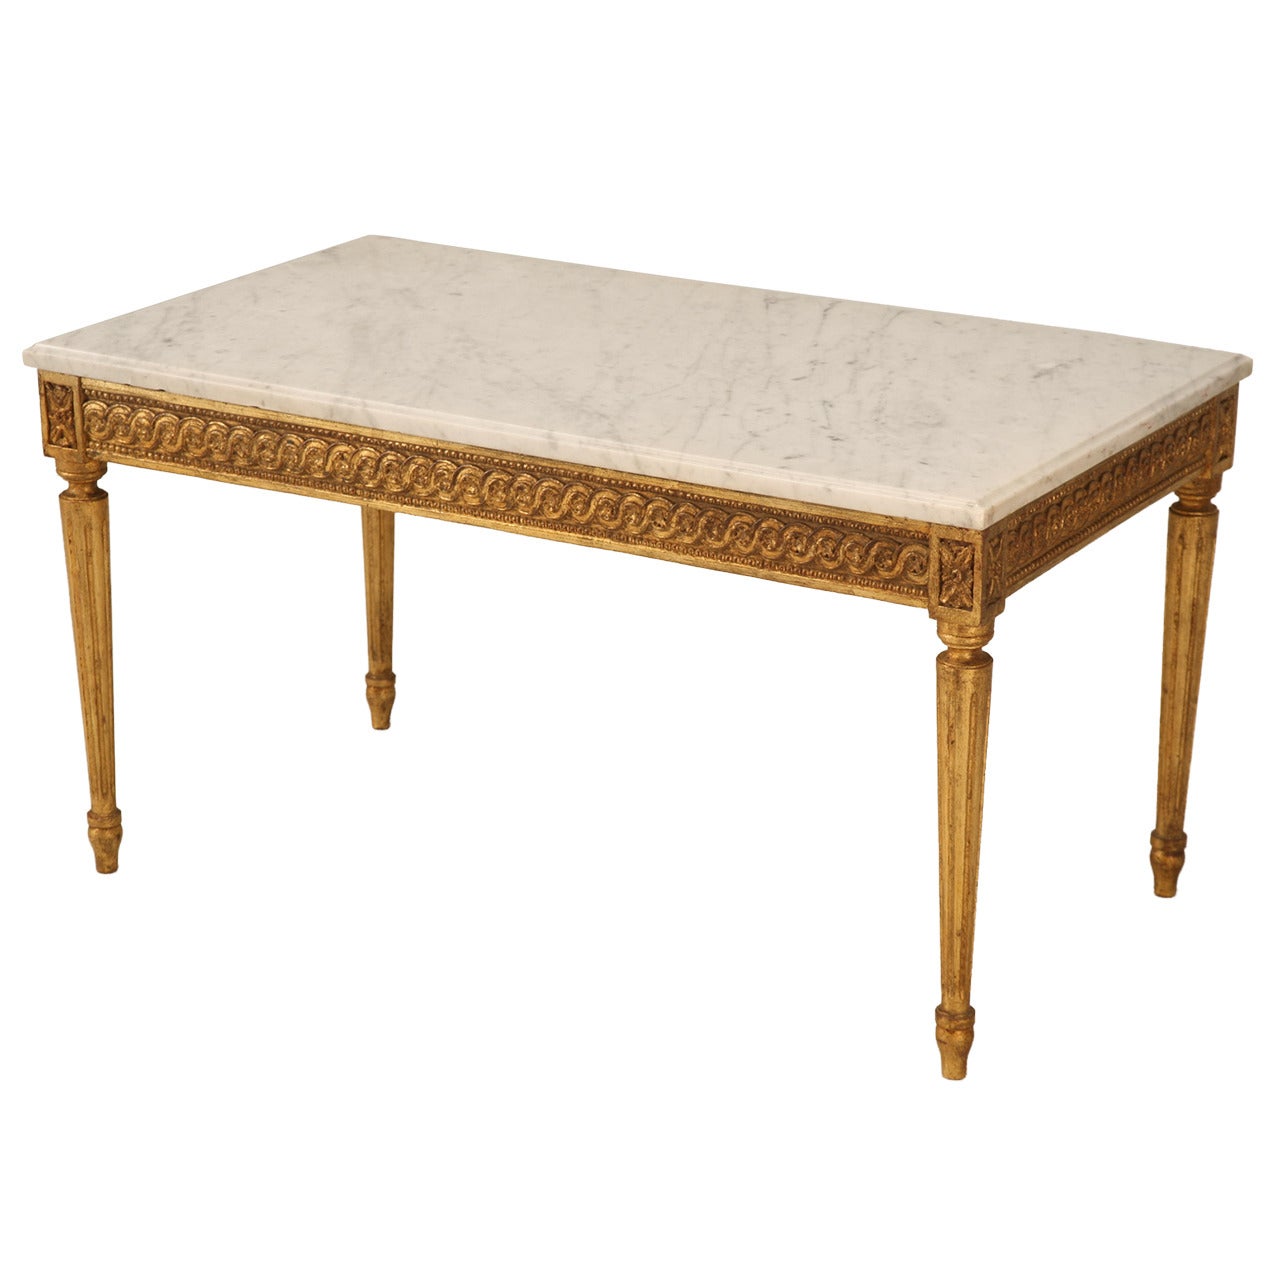 Vintage French Louis XVI Style Gilded Coffee Table with Marble Top